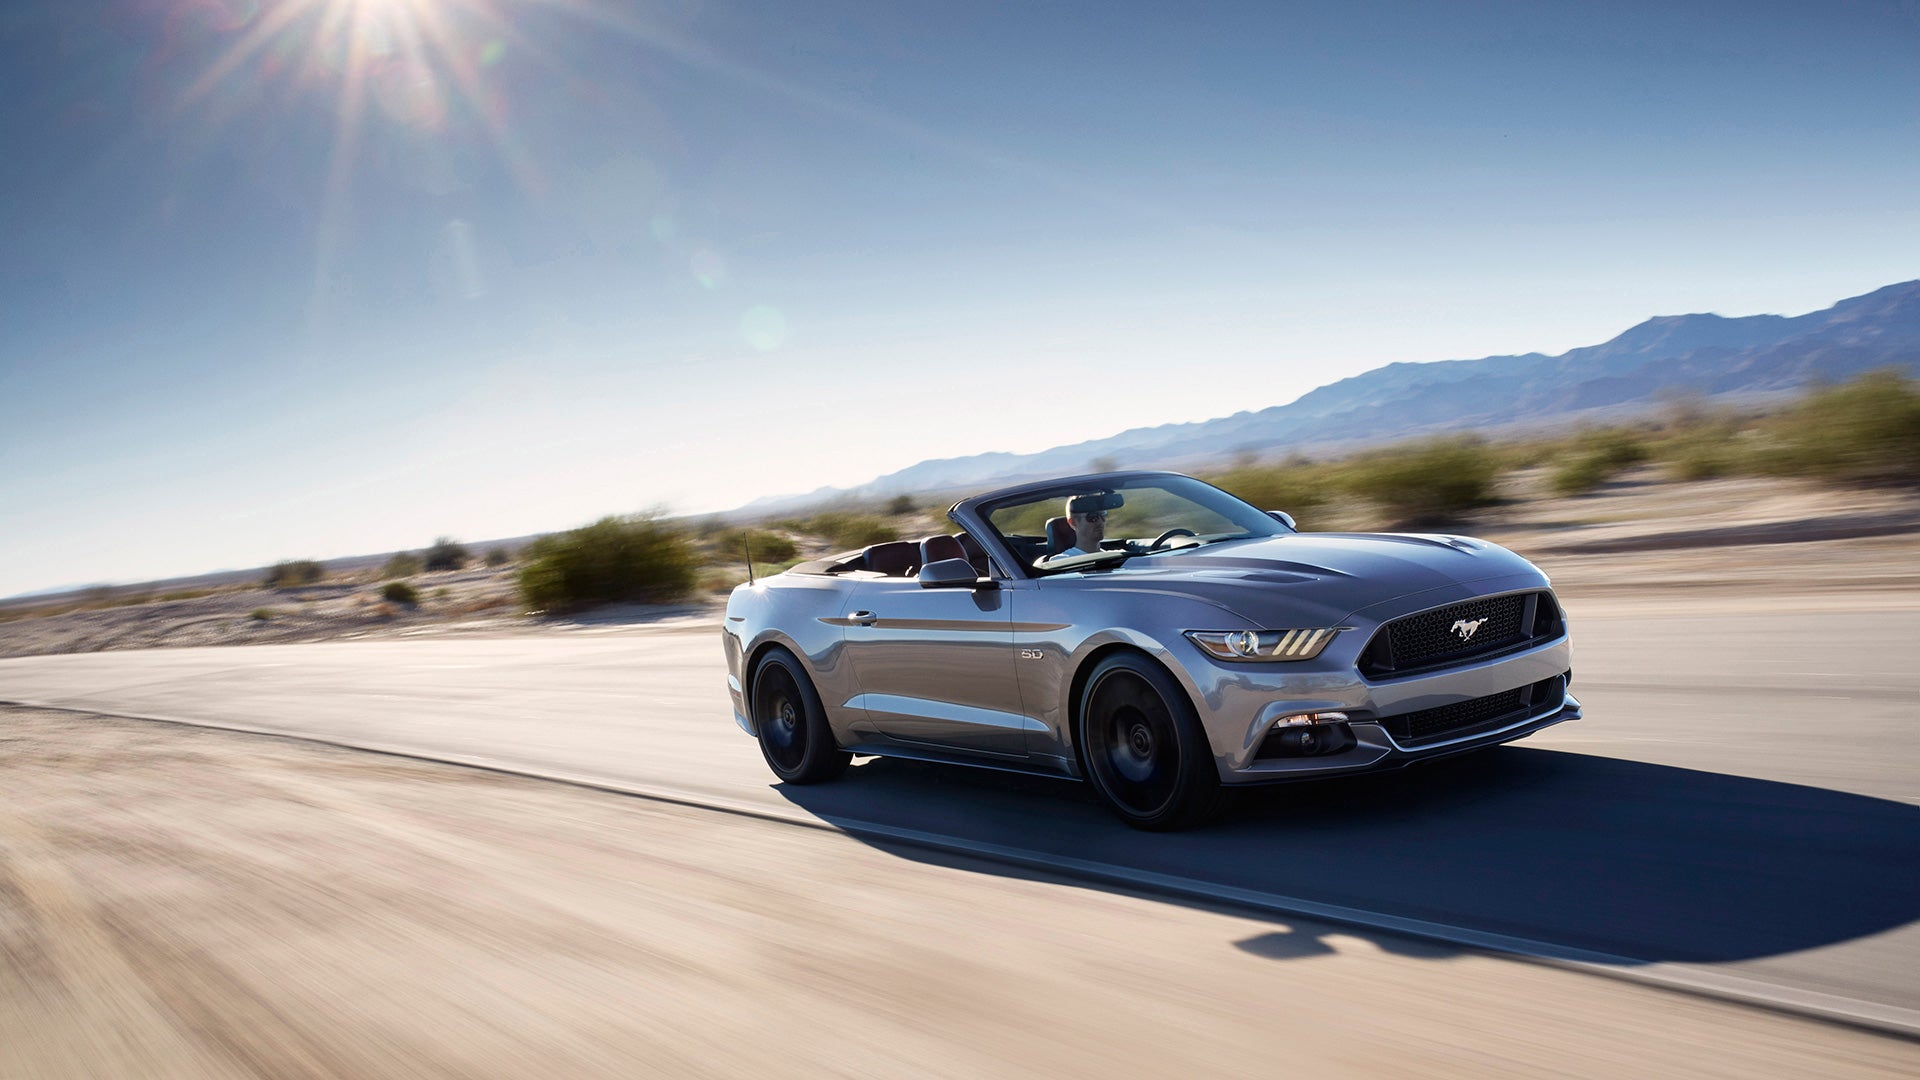 Ford Mustang Likely to Get 10-Speed Automatic for 2018 Model Year